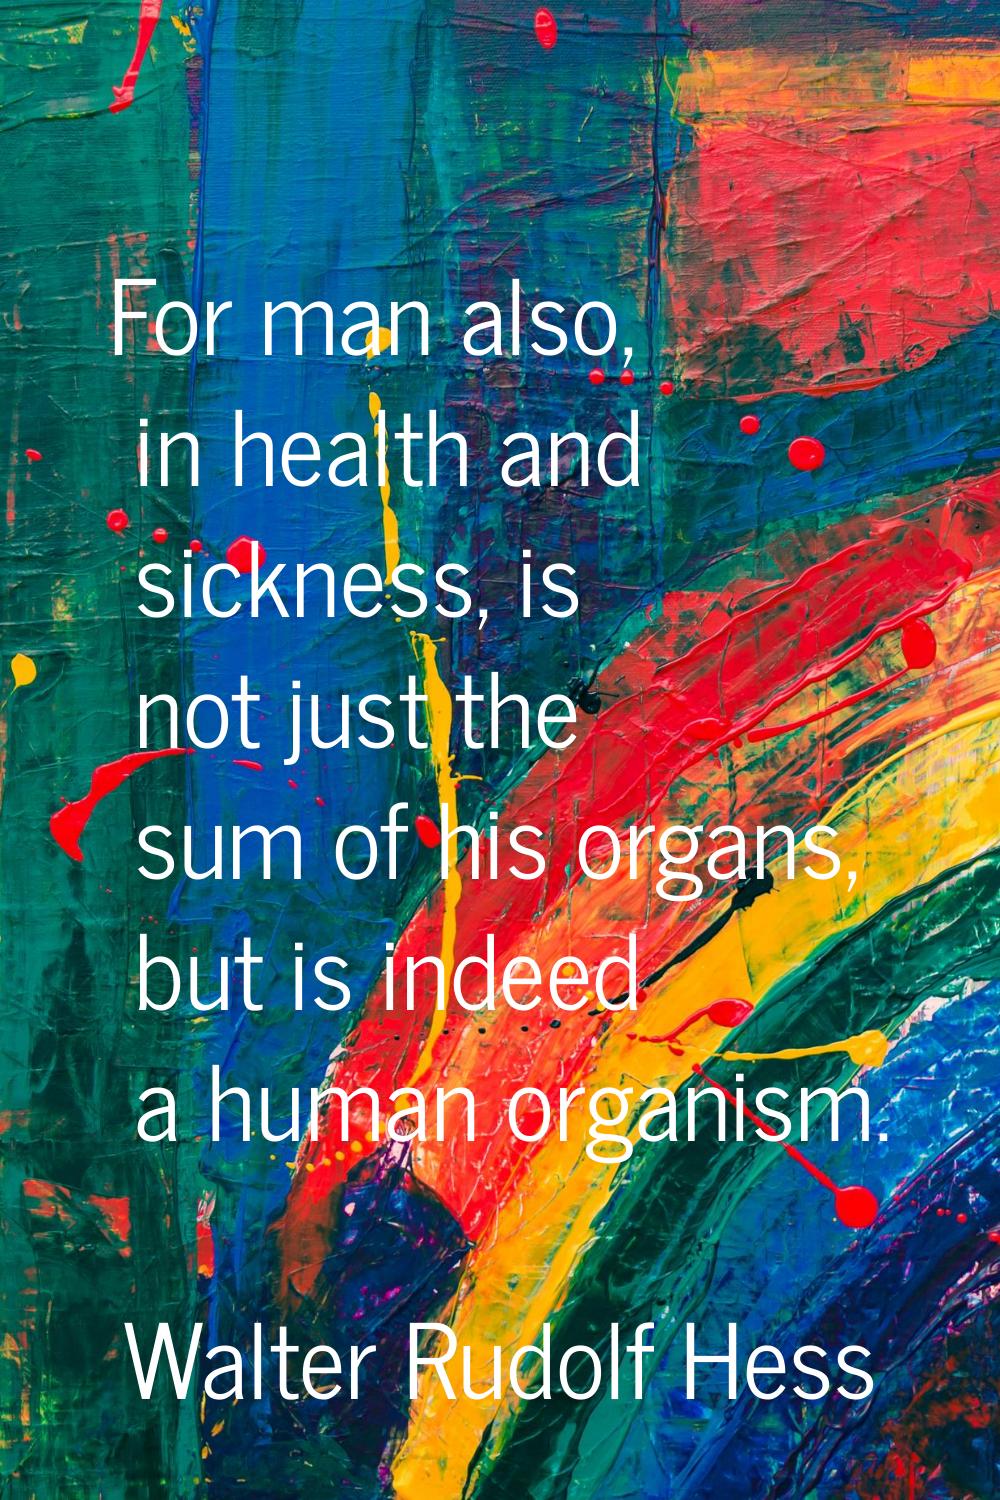 For man also, in health and sickness, is not just the sum of his organs, but is indeed a human orga